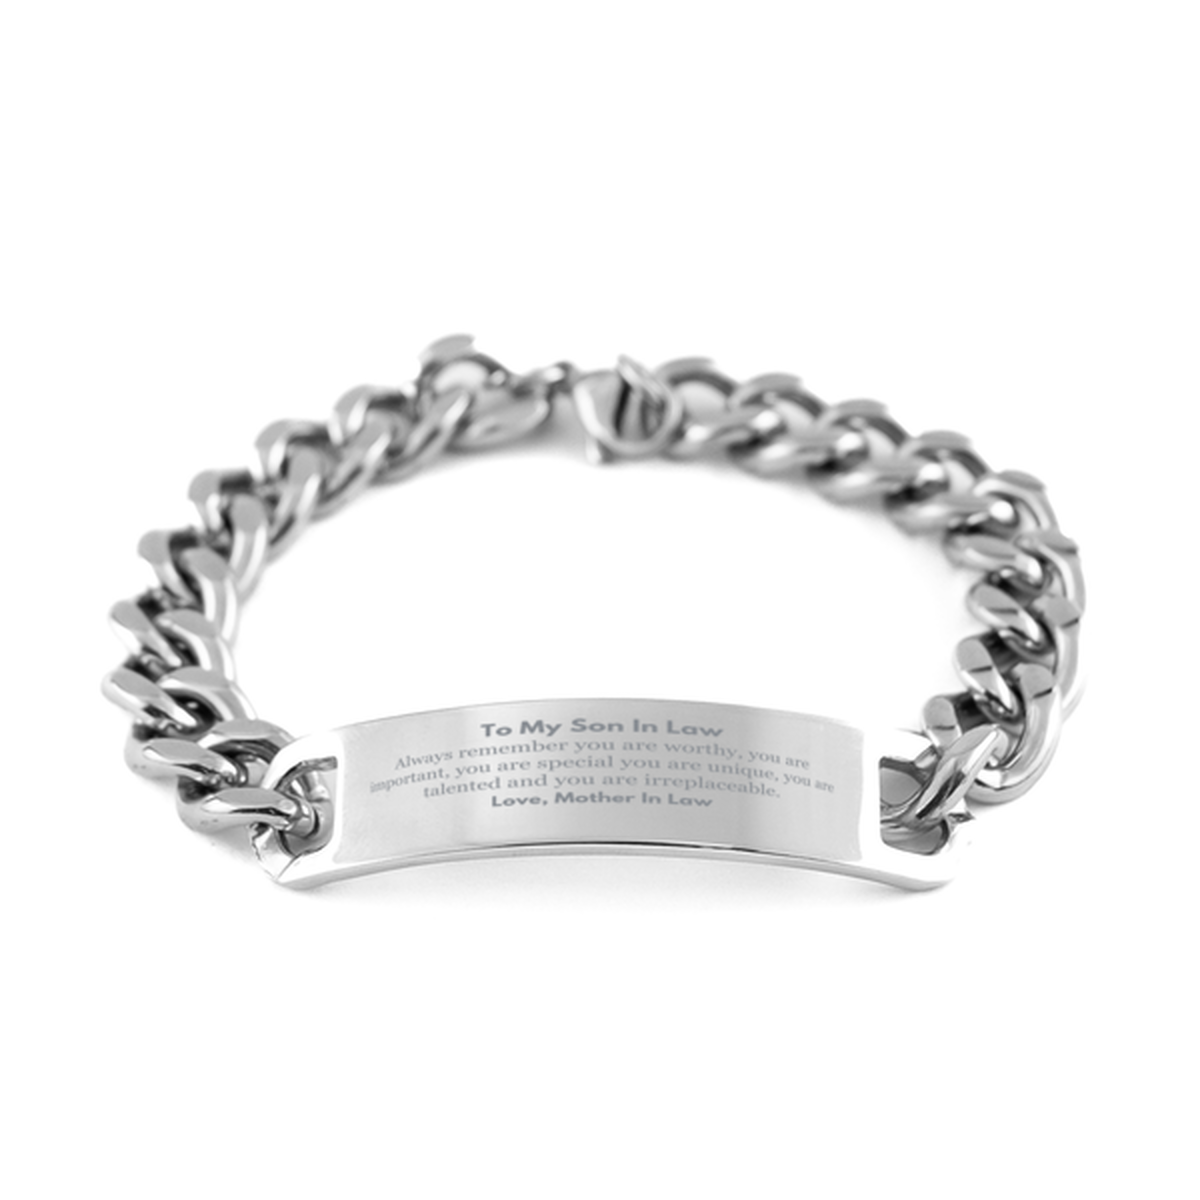 Son In Law Birthday Gifts from Mother In Law, Inspirational Cuban Chain Stainless Steel Bracelet for Son In Law Christmas Graduation Gifts for Son In Law Always remember you are worthy, you are important. Love, Mother In Law